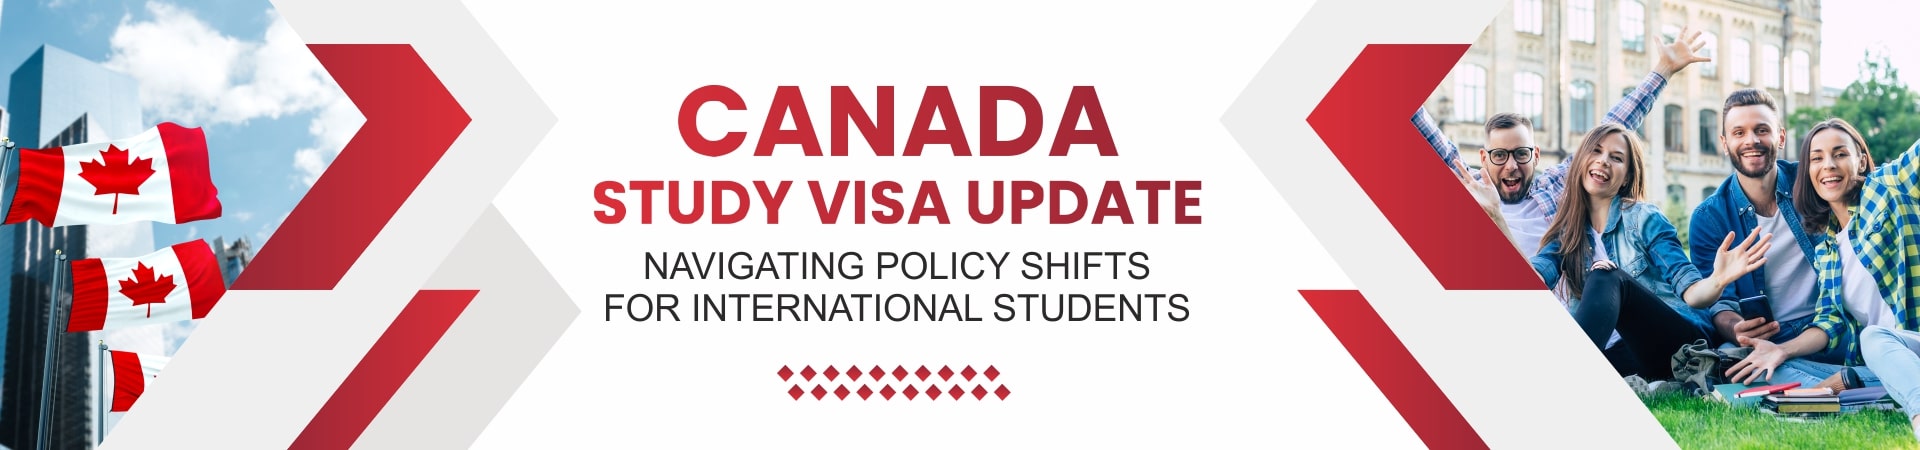 Canada Update: Navigating Policy Shifts for International Students